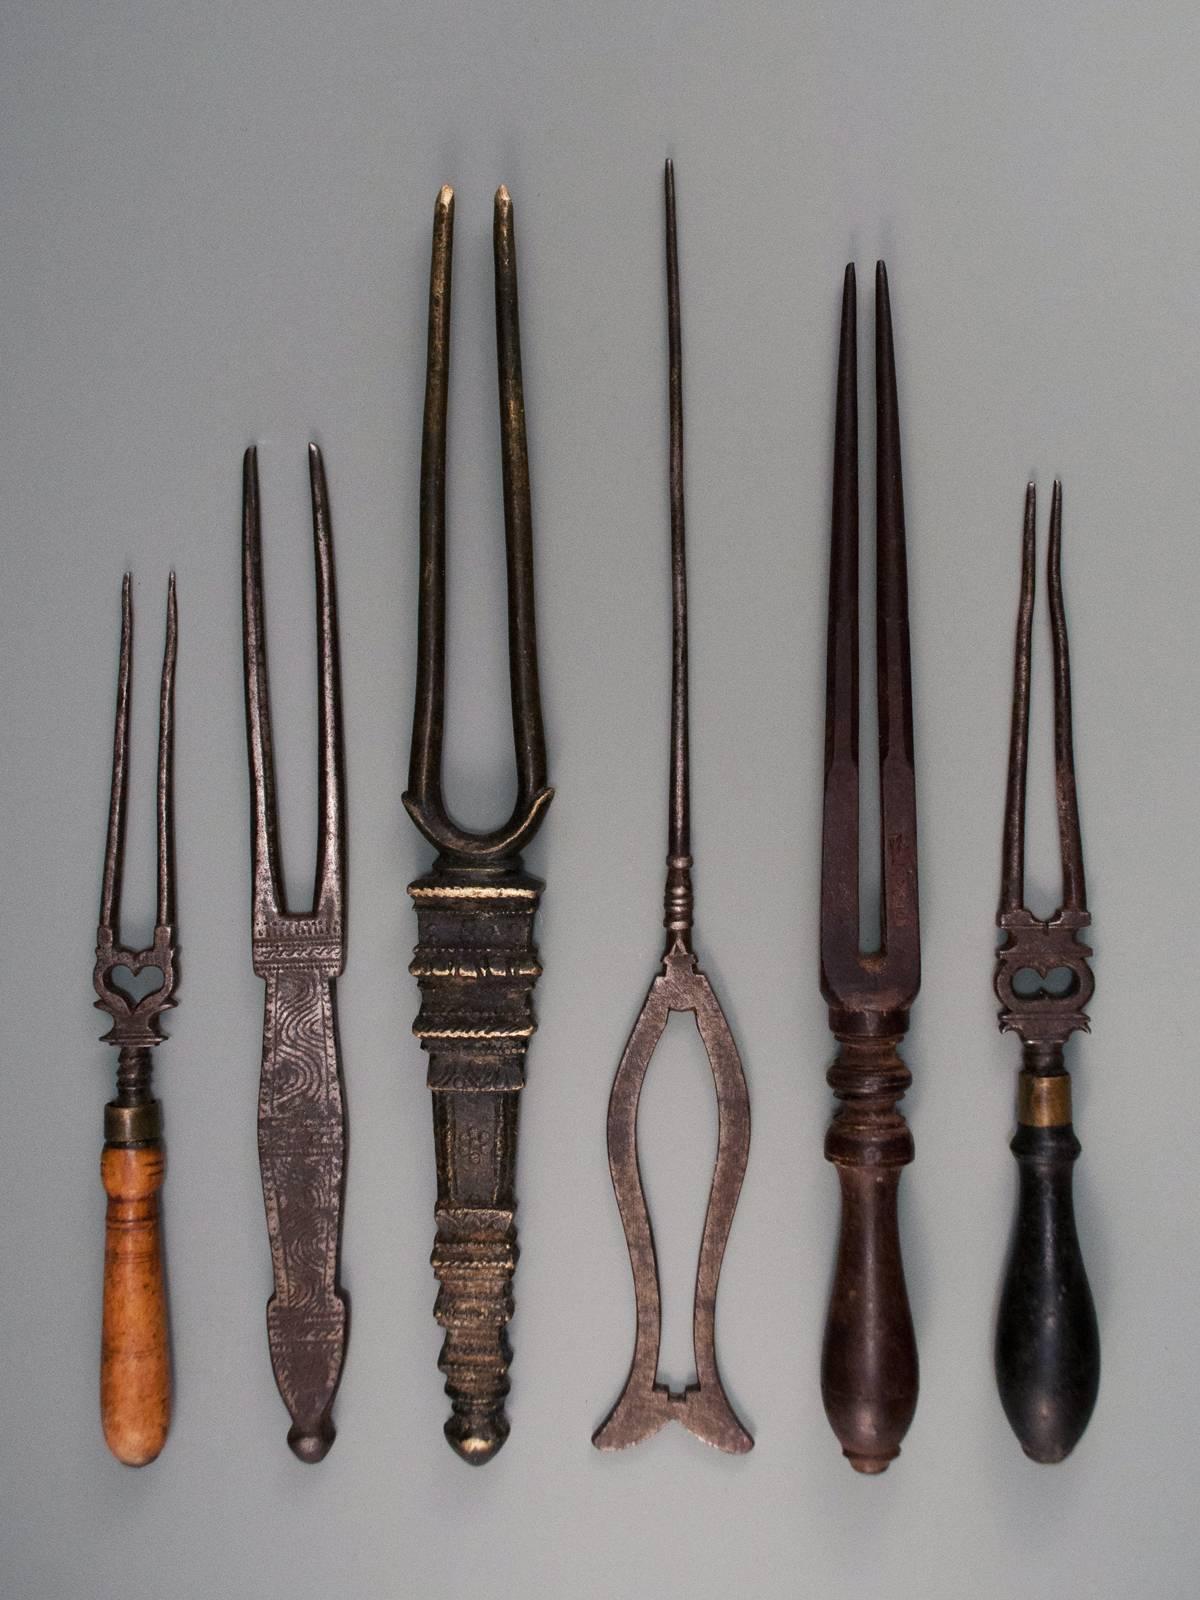 Six early 20th century hair detanglers from Kerala and South Karnataka, India.

An unusual group of six hair detanglers found exclusively in Southern India. The carved wooden example seen second from the right has some script characters incised on